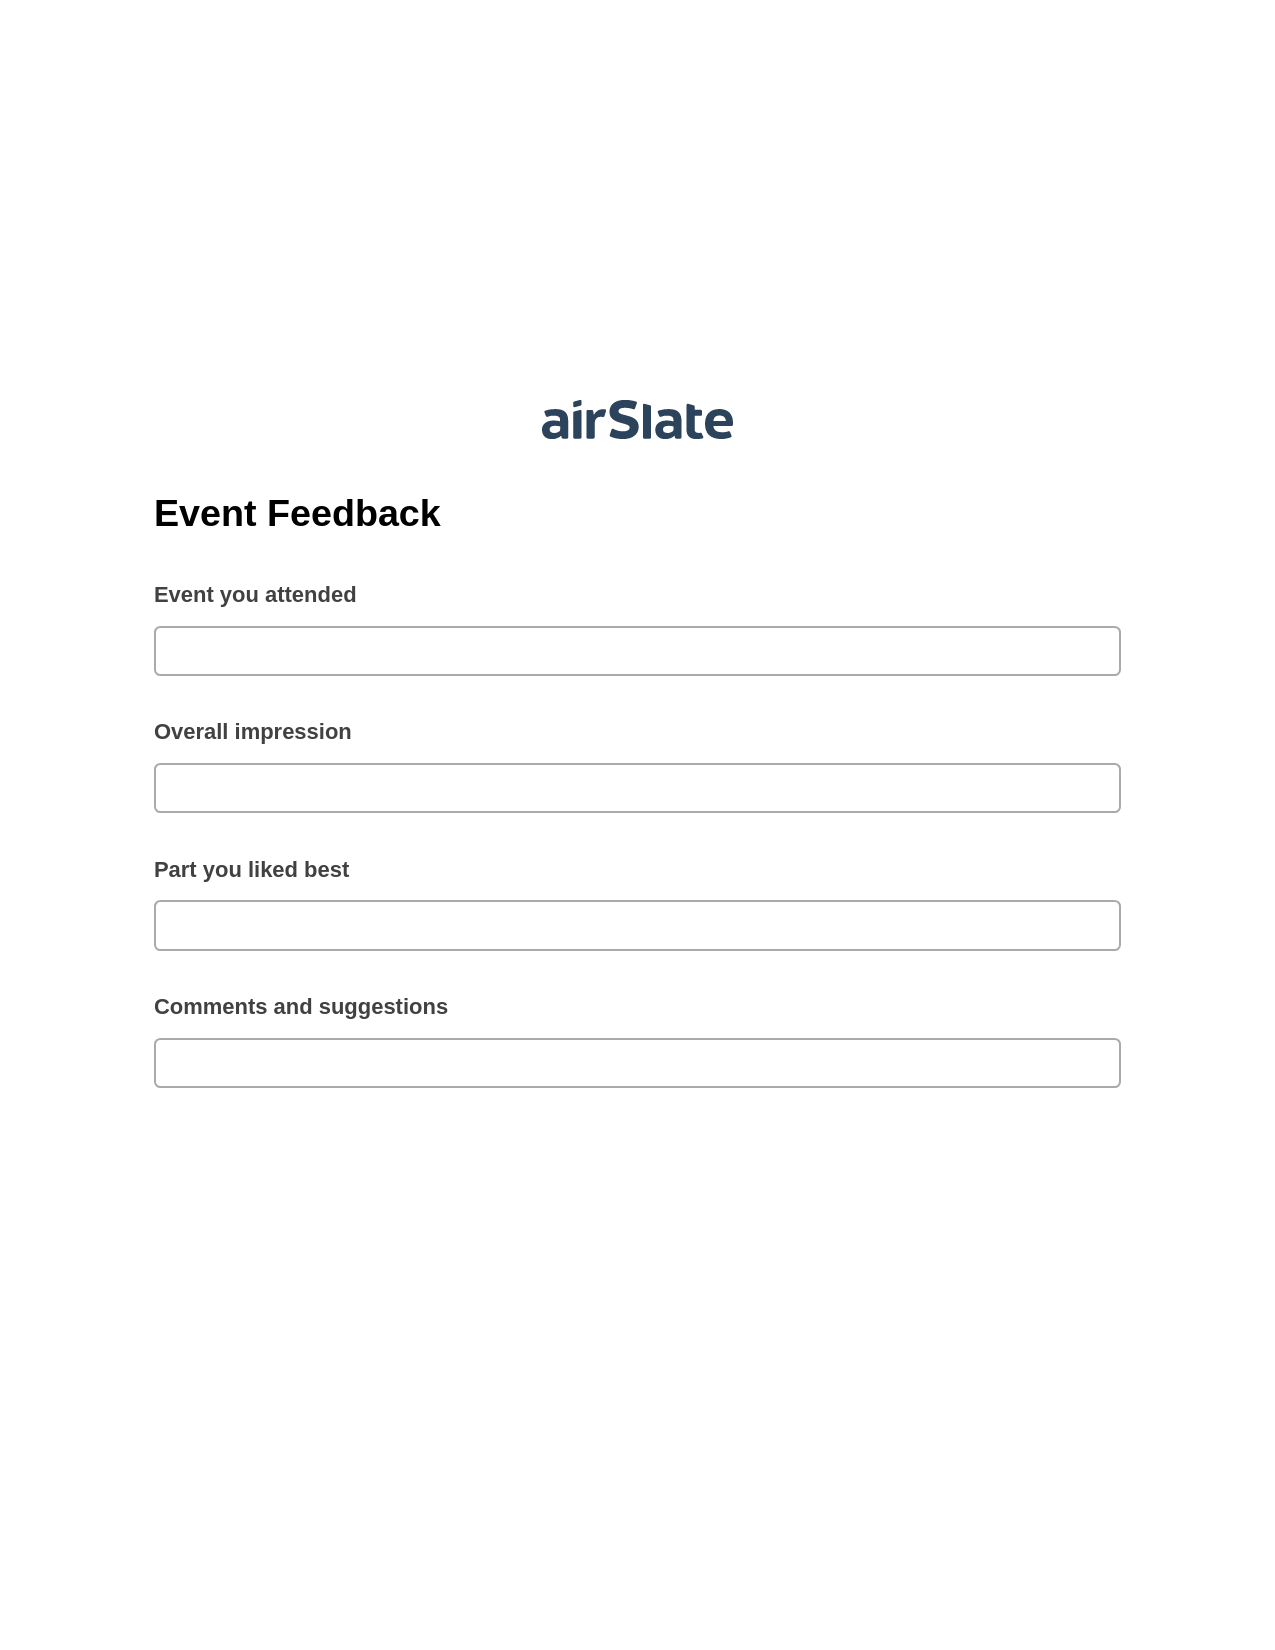 Event Feedback Pre-fill from Salesforce Records with SOQL Bot, Export to MS Dynamics 365 Bot, Export to Excel 365 Bot